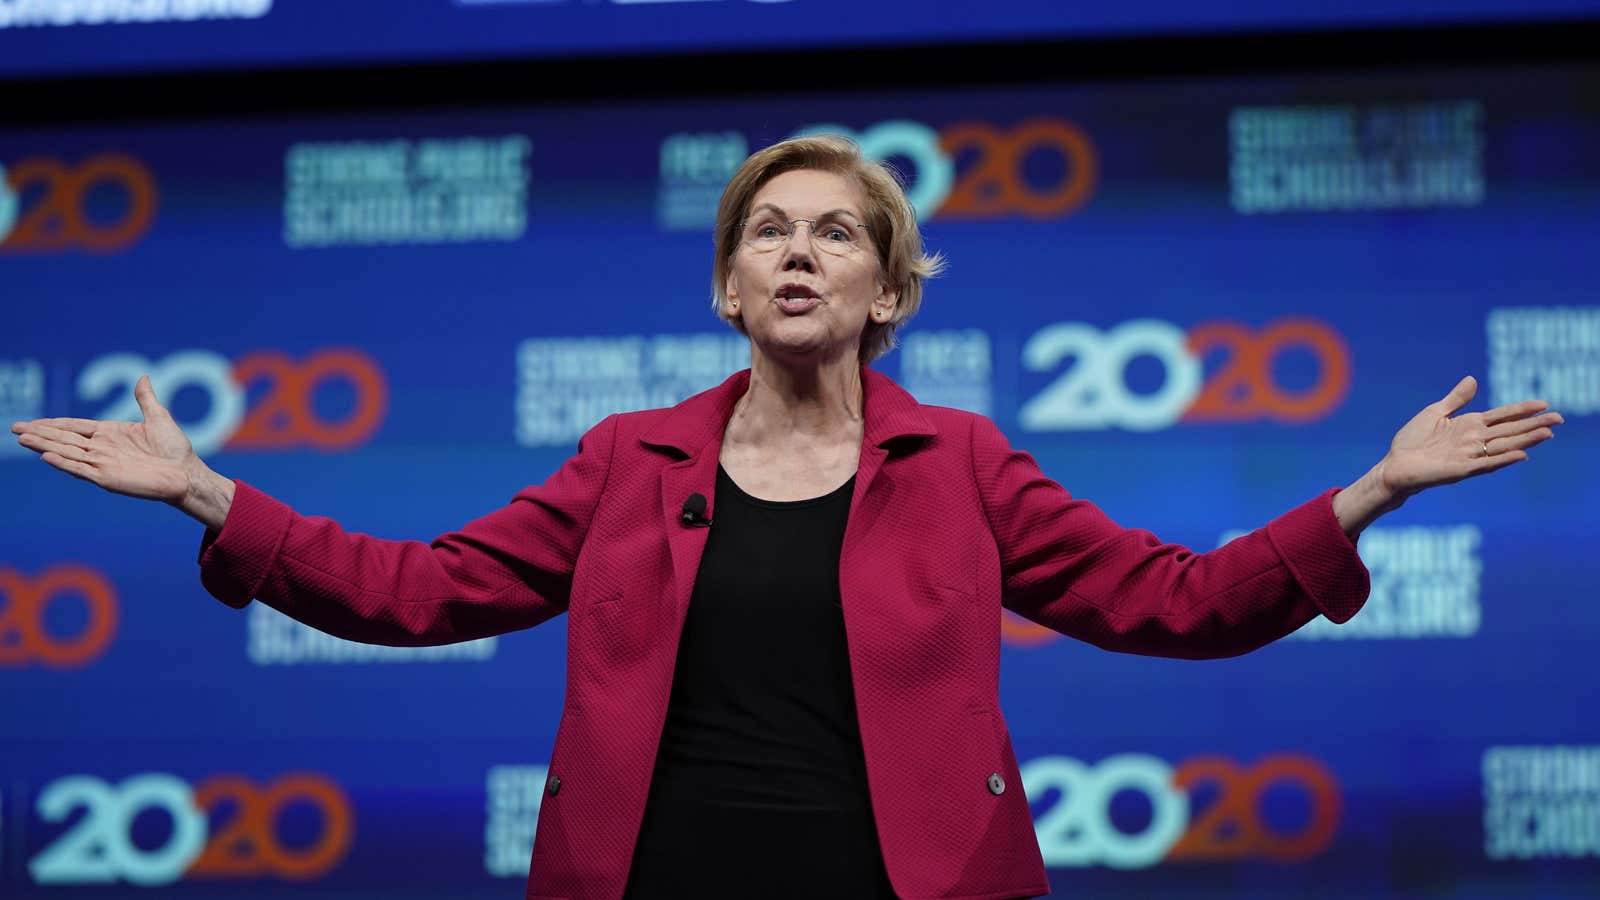 Warren raised $19 million without doing any fundraising.